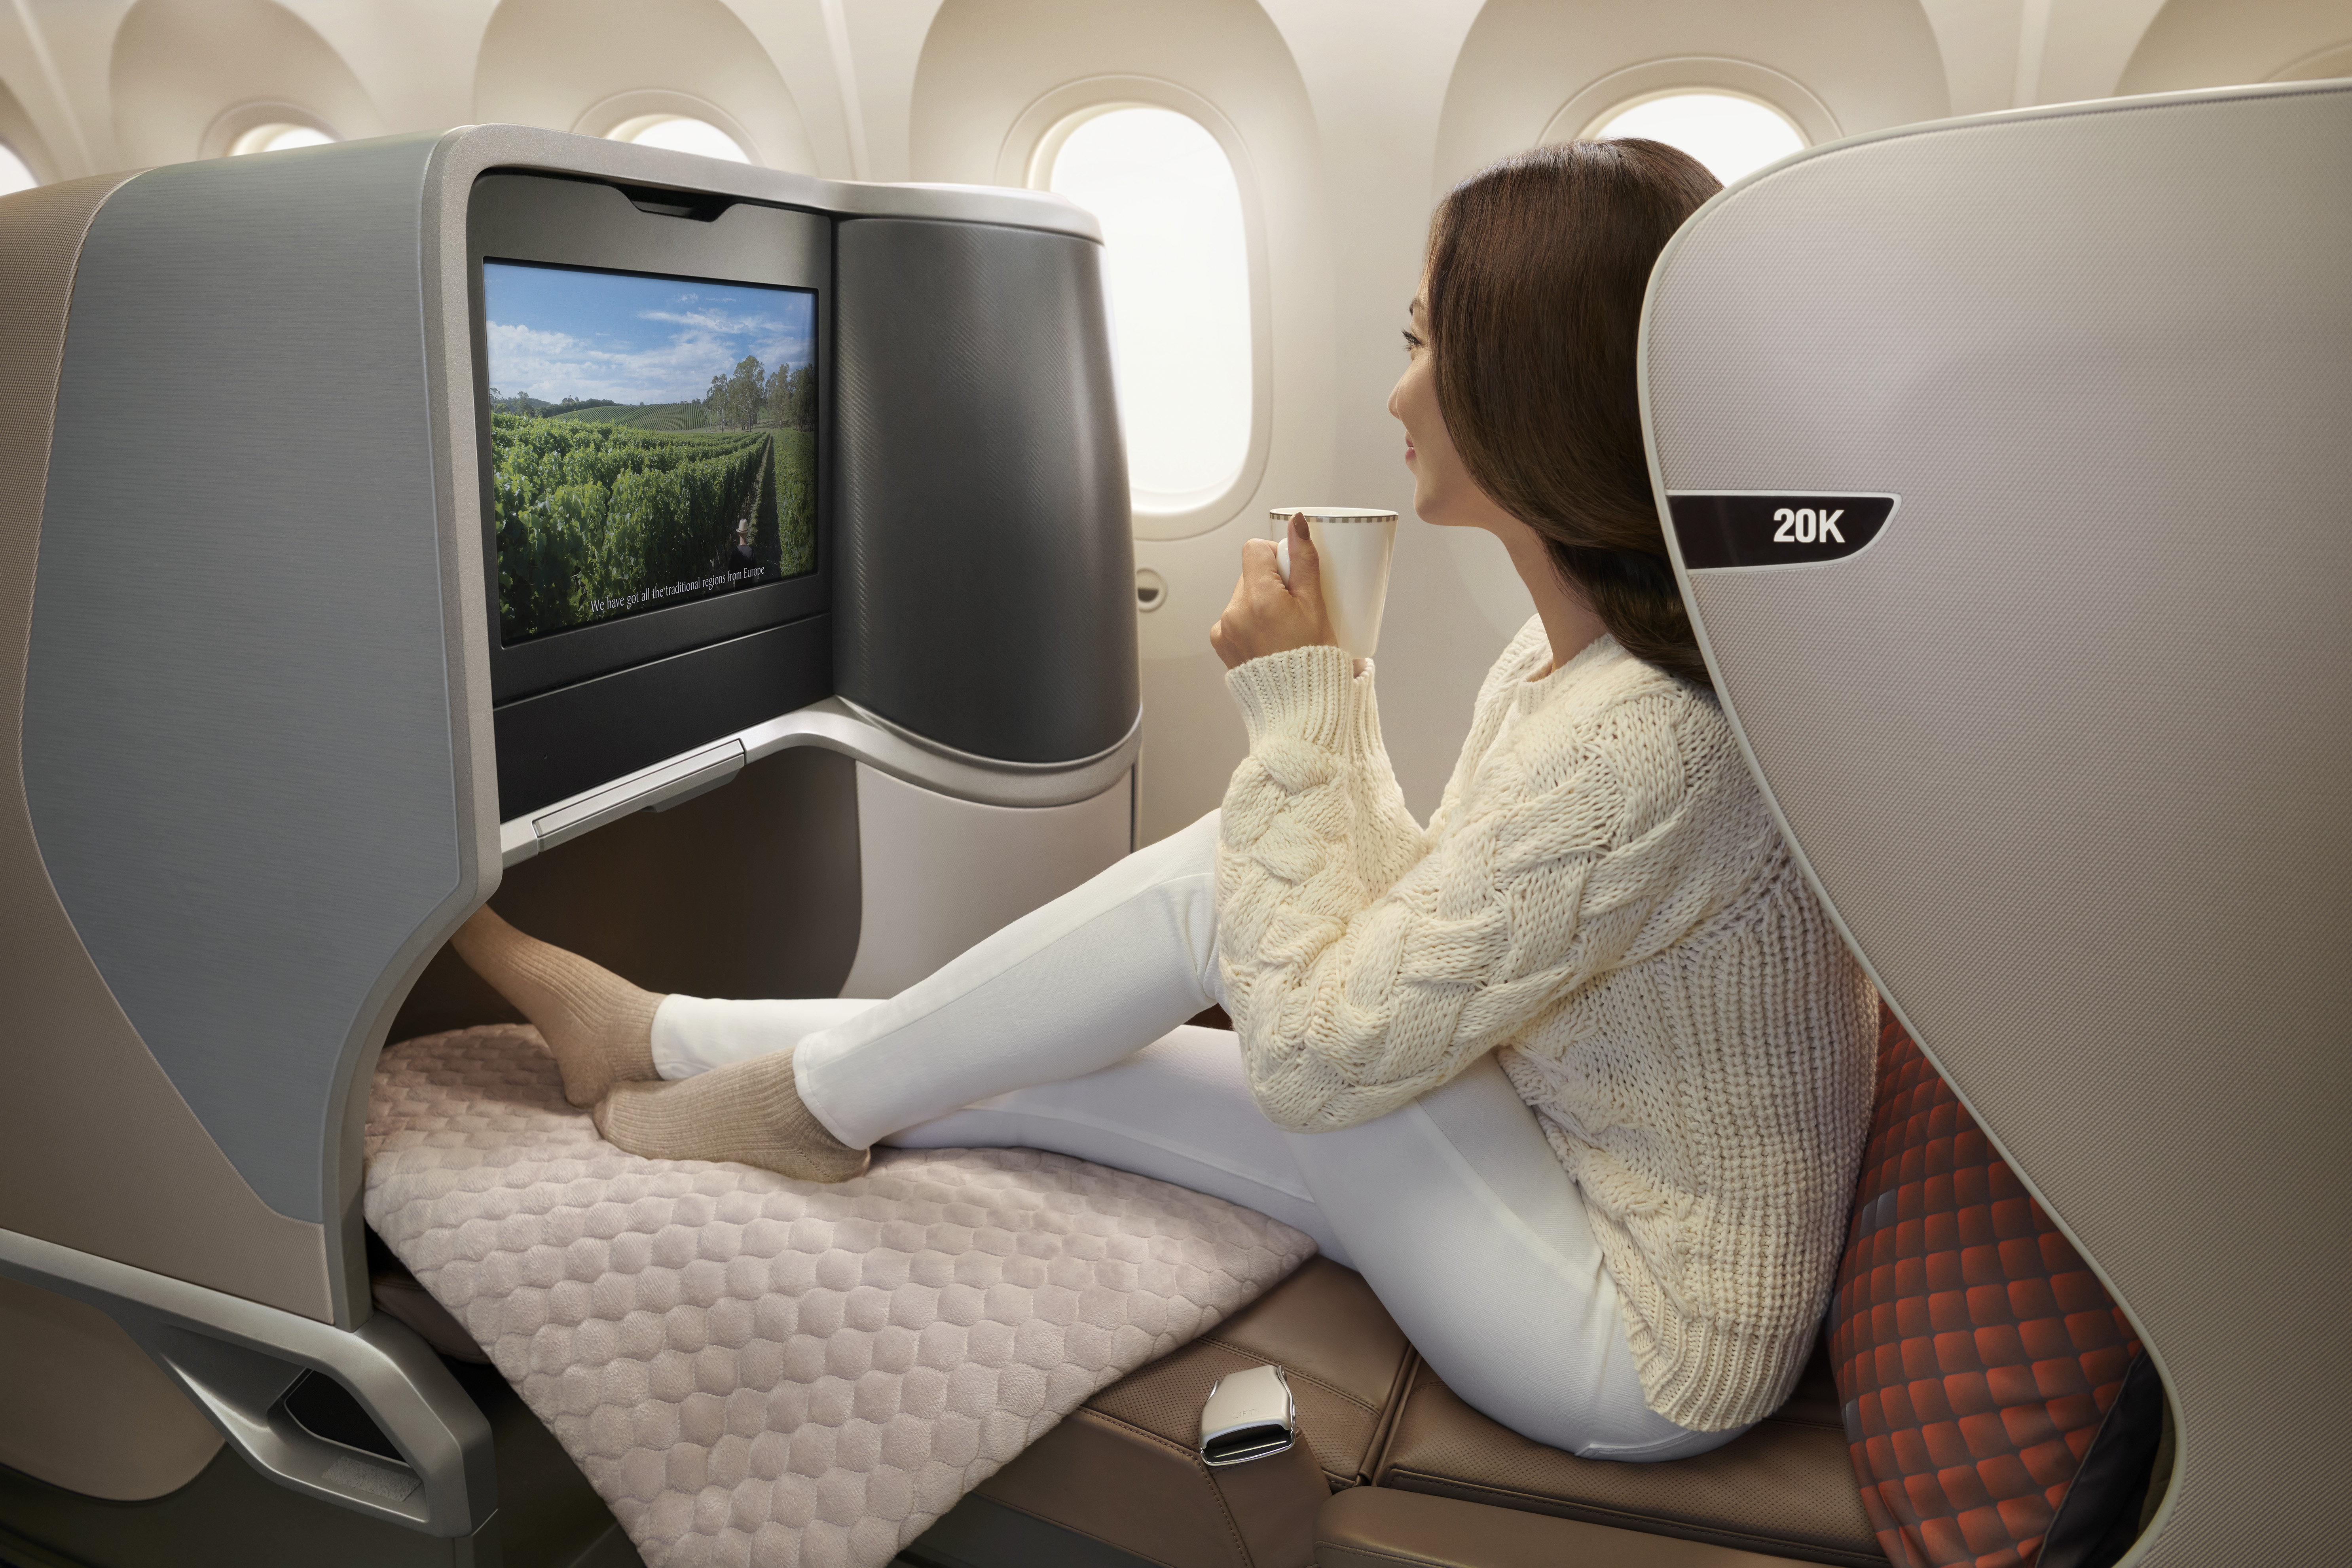 Singapore Airlines Boeing 787-10 Business Class